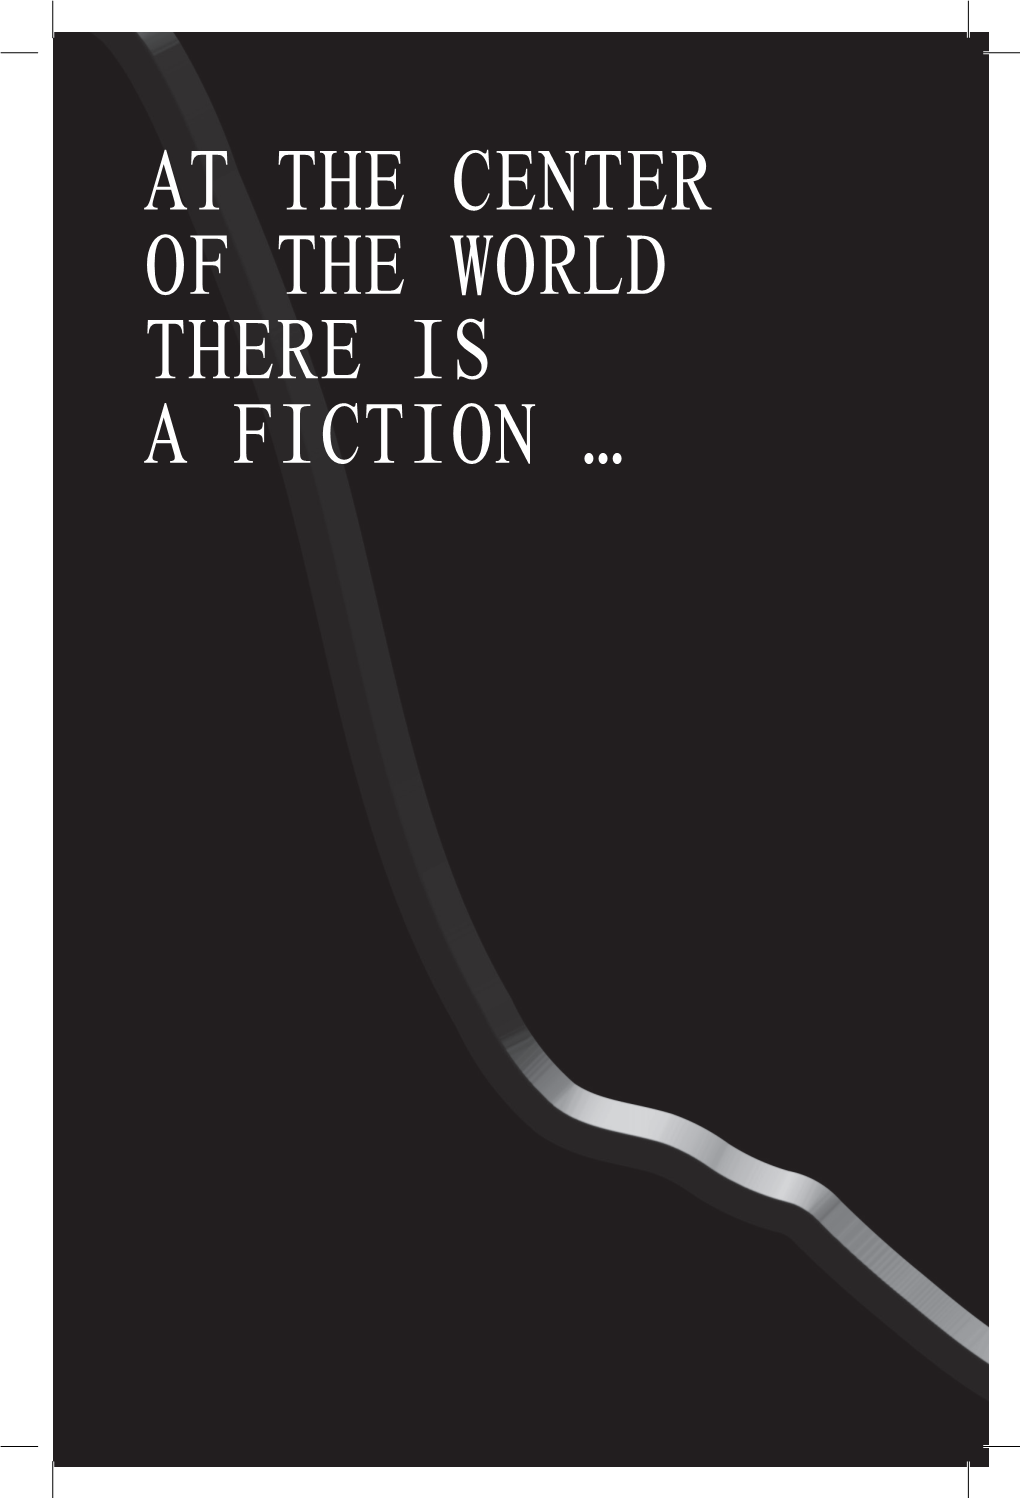 At the Center of the World There Is a Fiction …